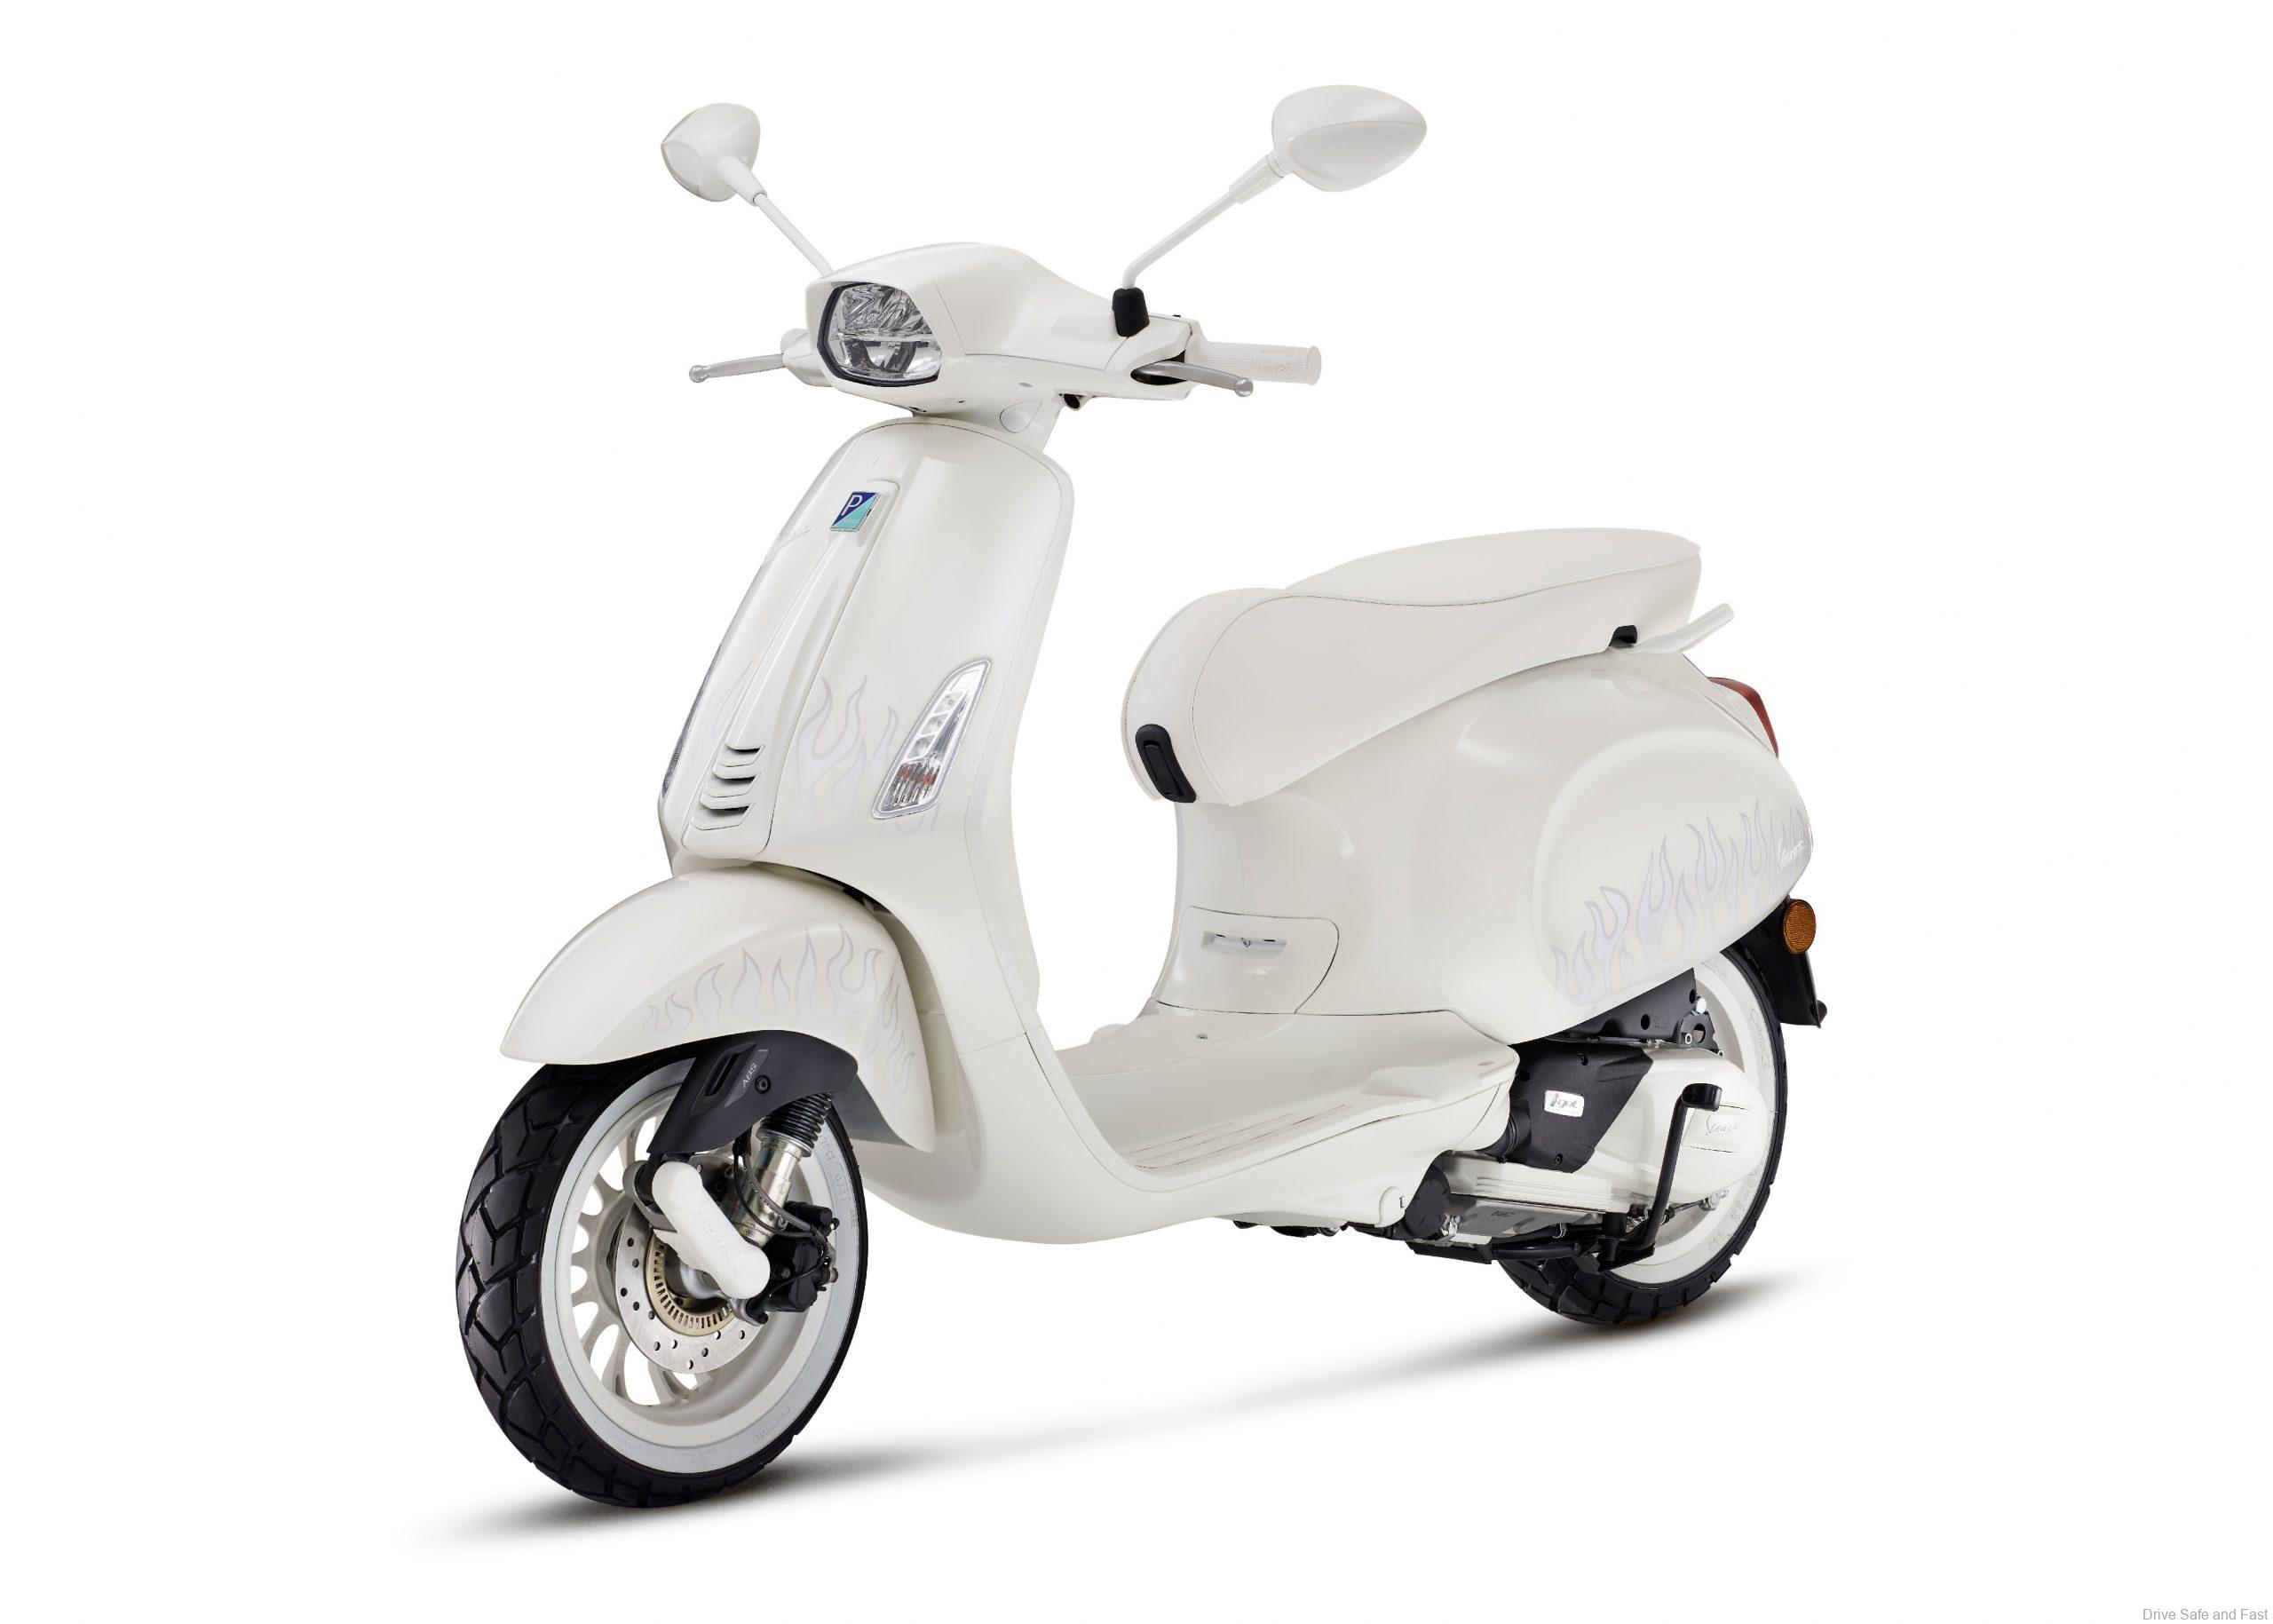 Justin Bieber X Vespa First Look [Limited Edition Scooter]